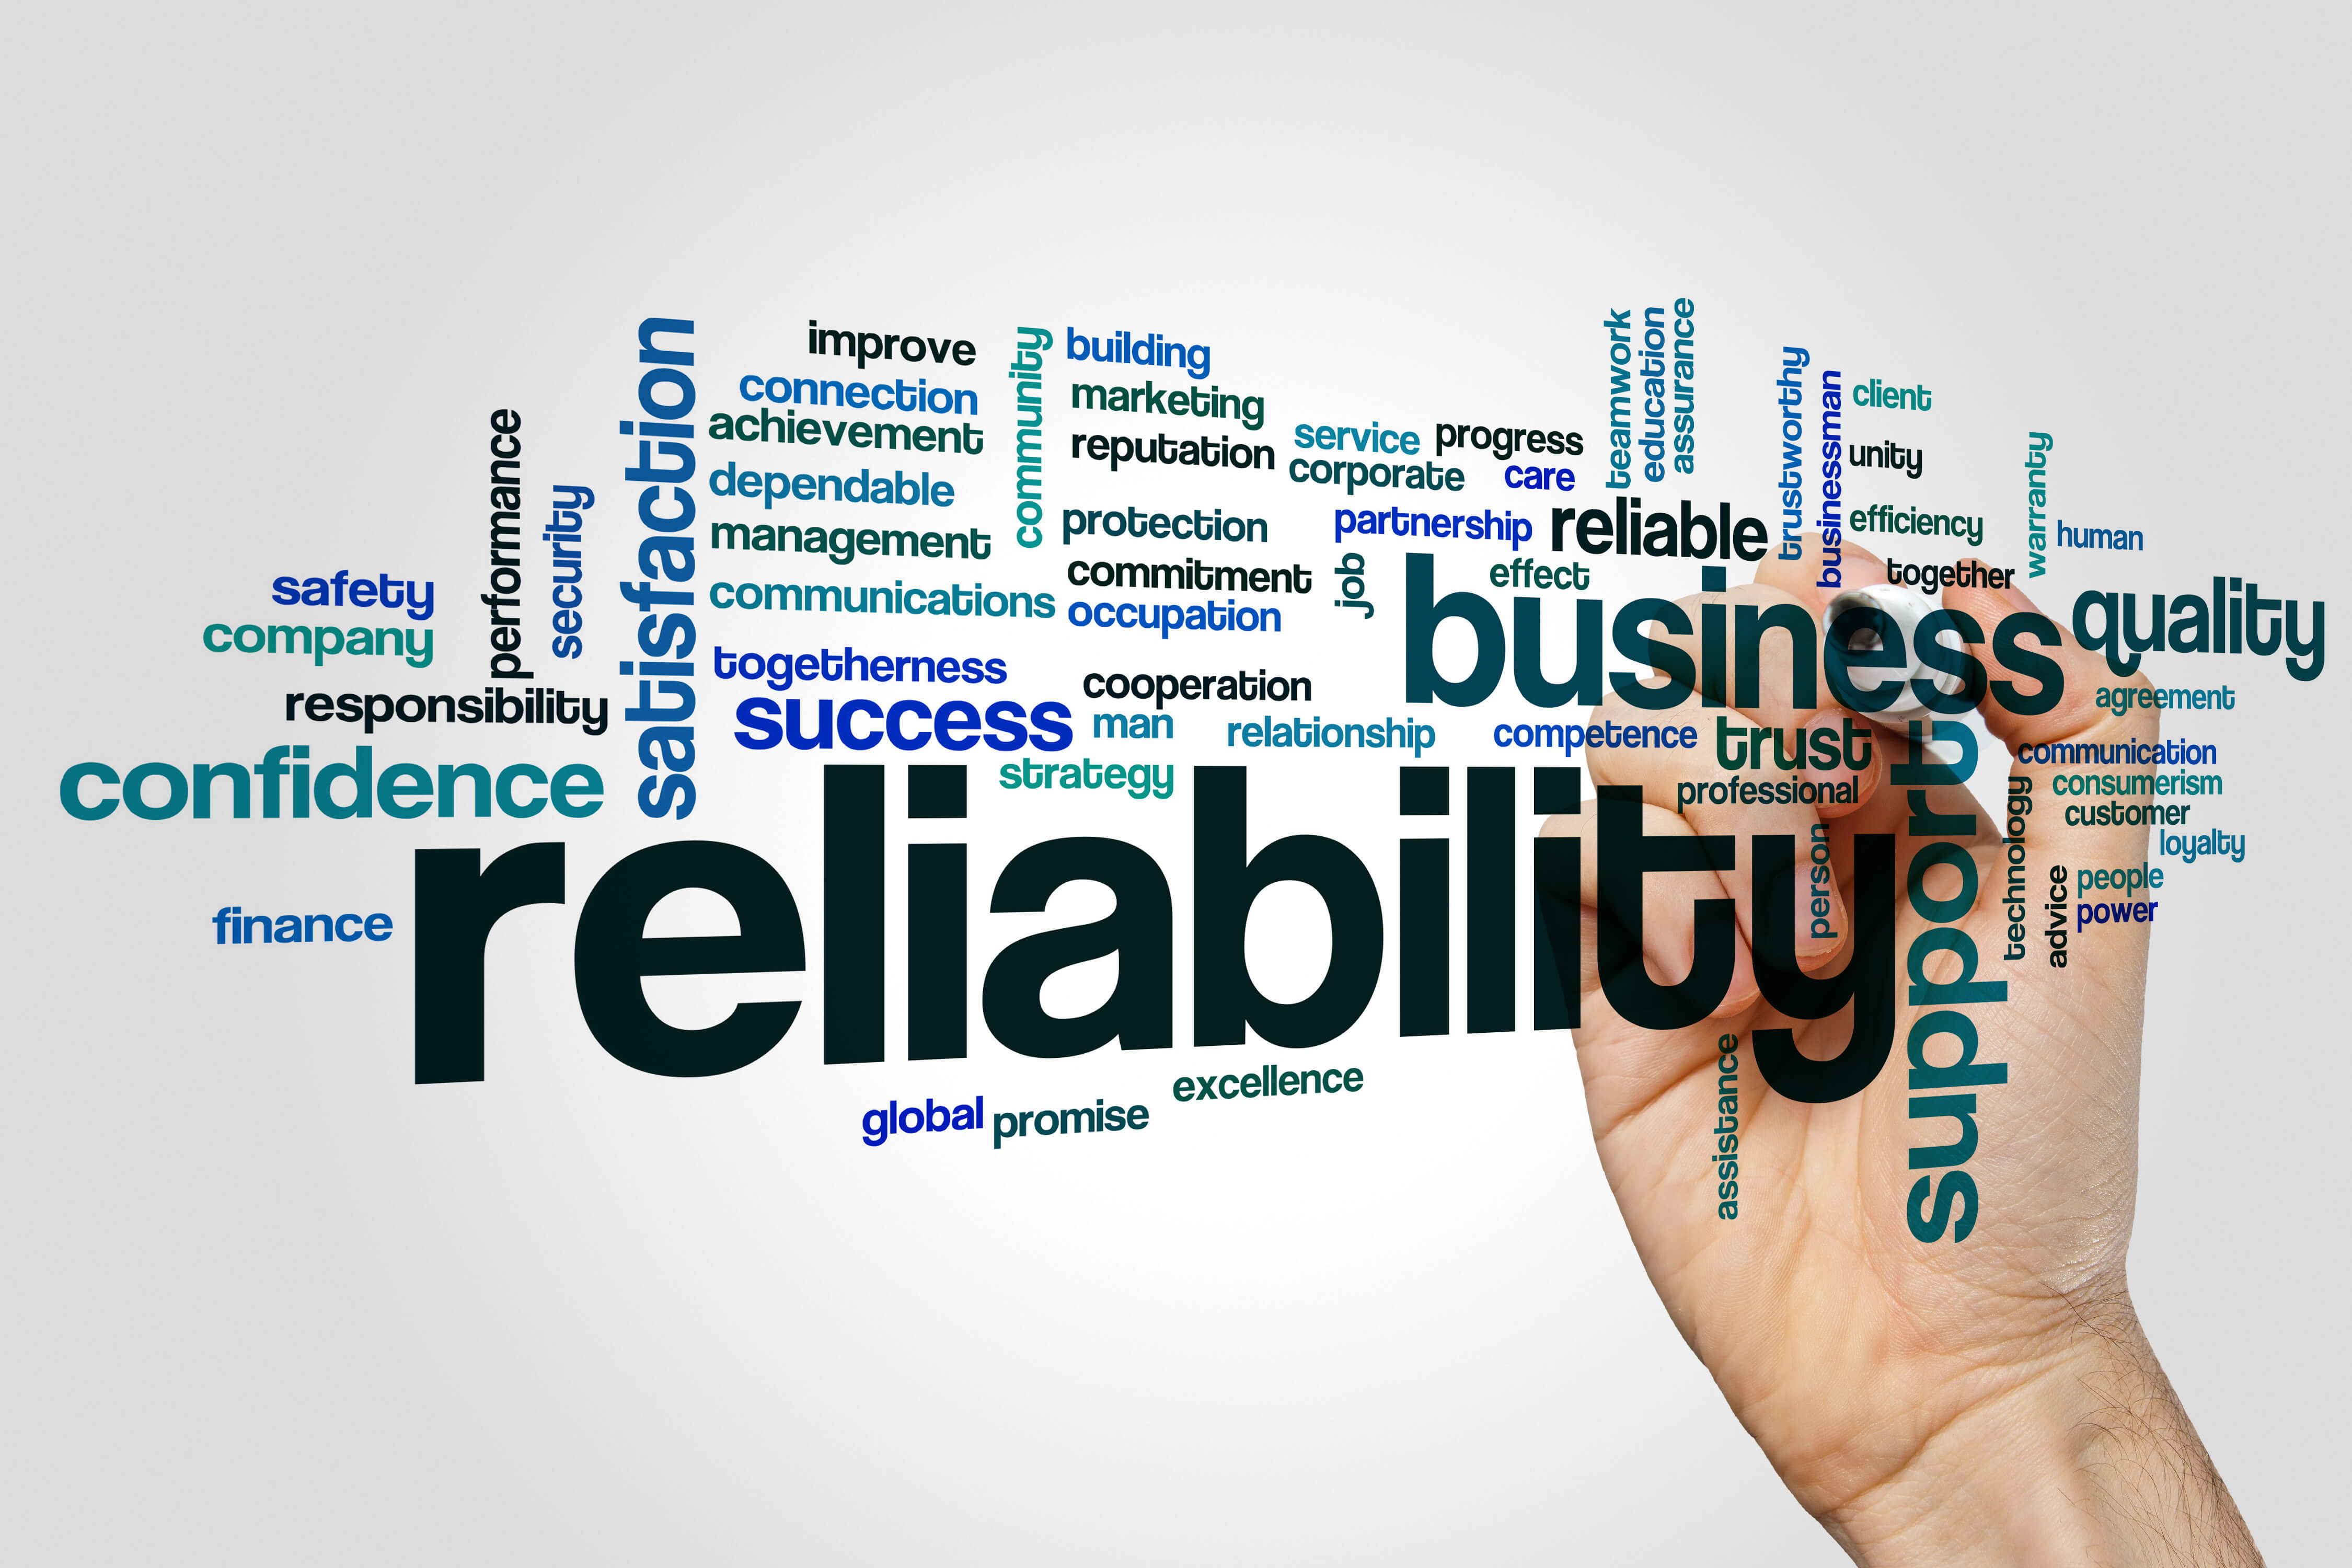  A word cloud image with the central word 'Reliability' and related words such as 'performance', 'security', 'trustworthiness', 'quality', and 'support'.